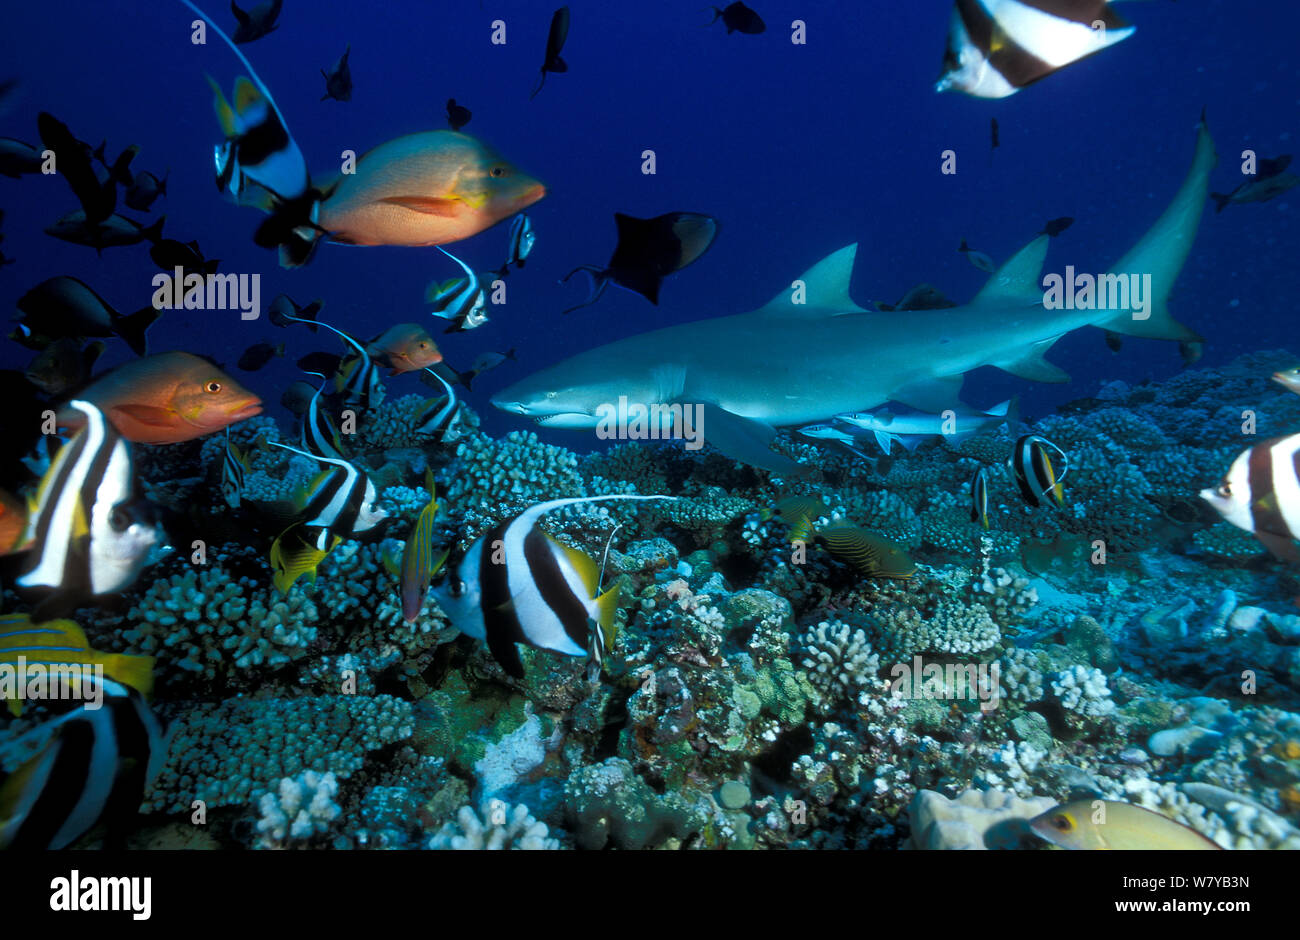 Sicklefin lemon shark (Negaprion acutidens) surrounded by fish on coral reef, Moorea Island, Society Islands, French Polynesia, Pacific Ocean. Stock Photo